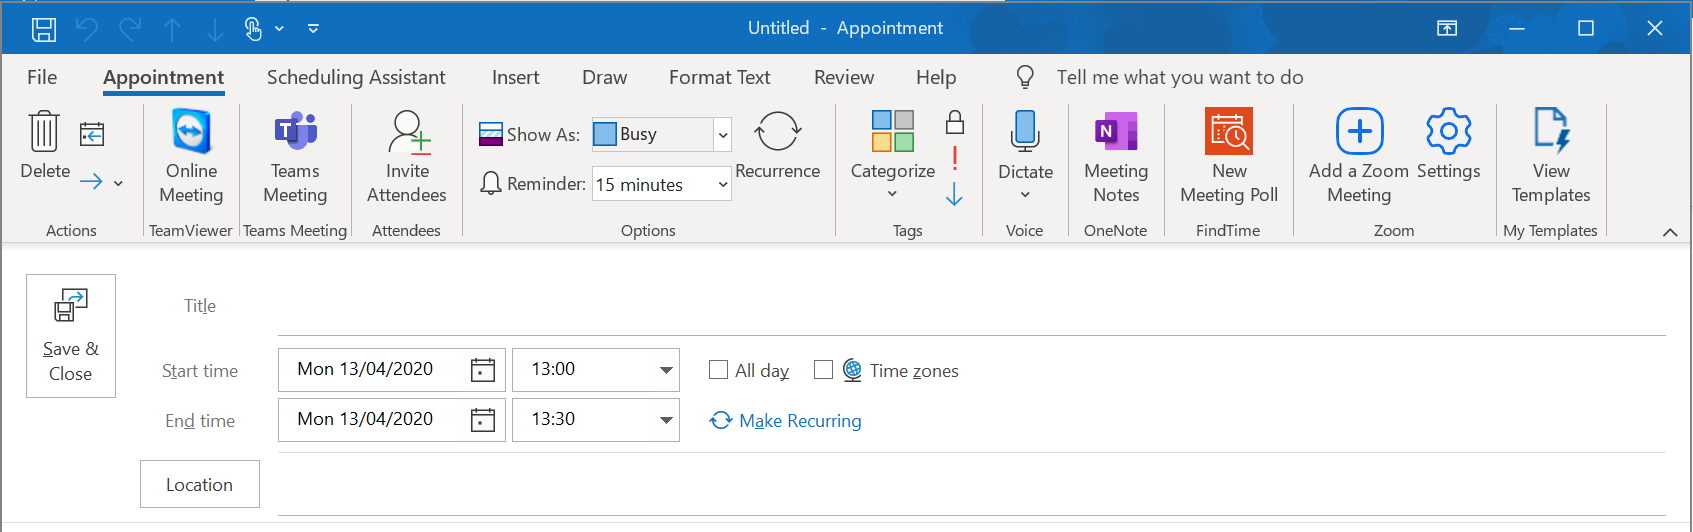 How to set up a zoom meeting on outlook universitylas